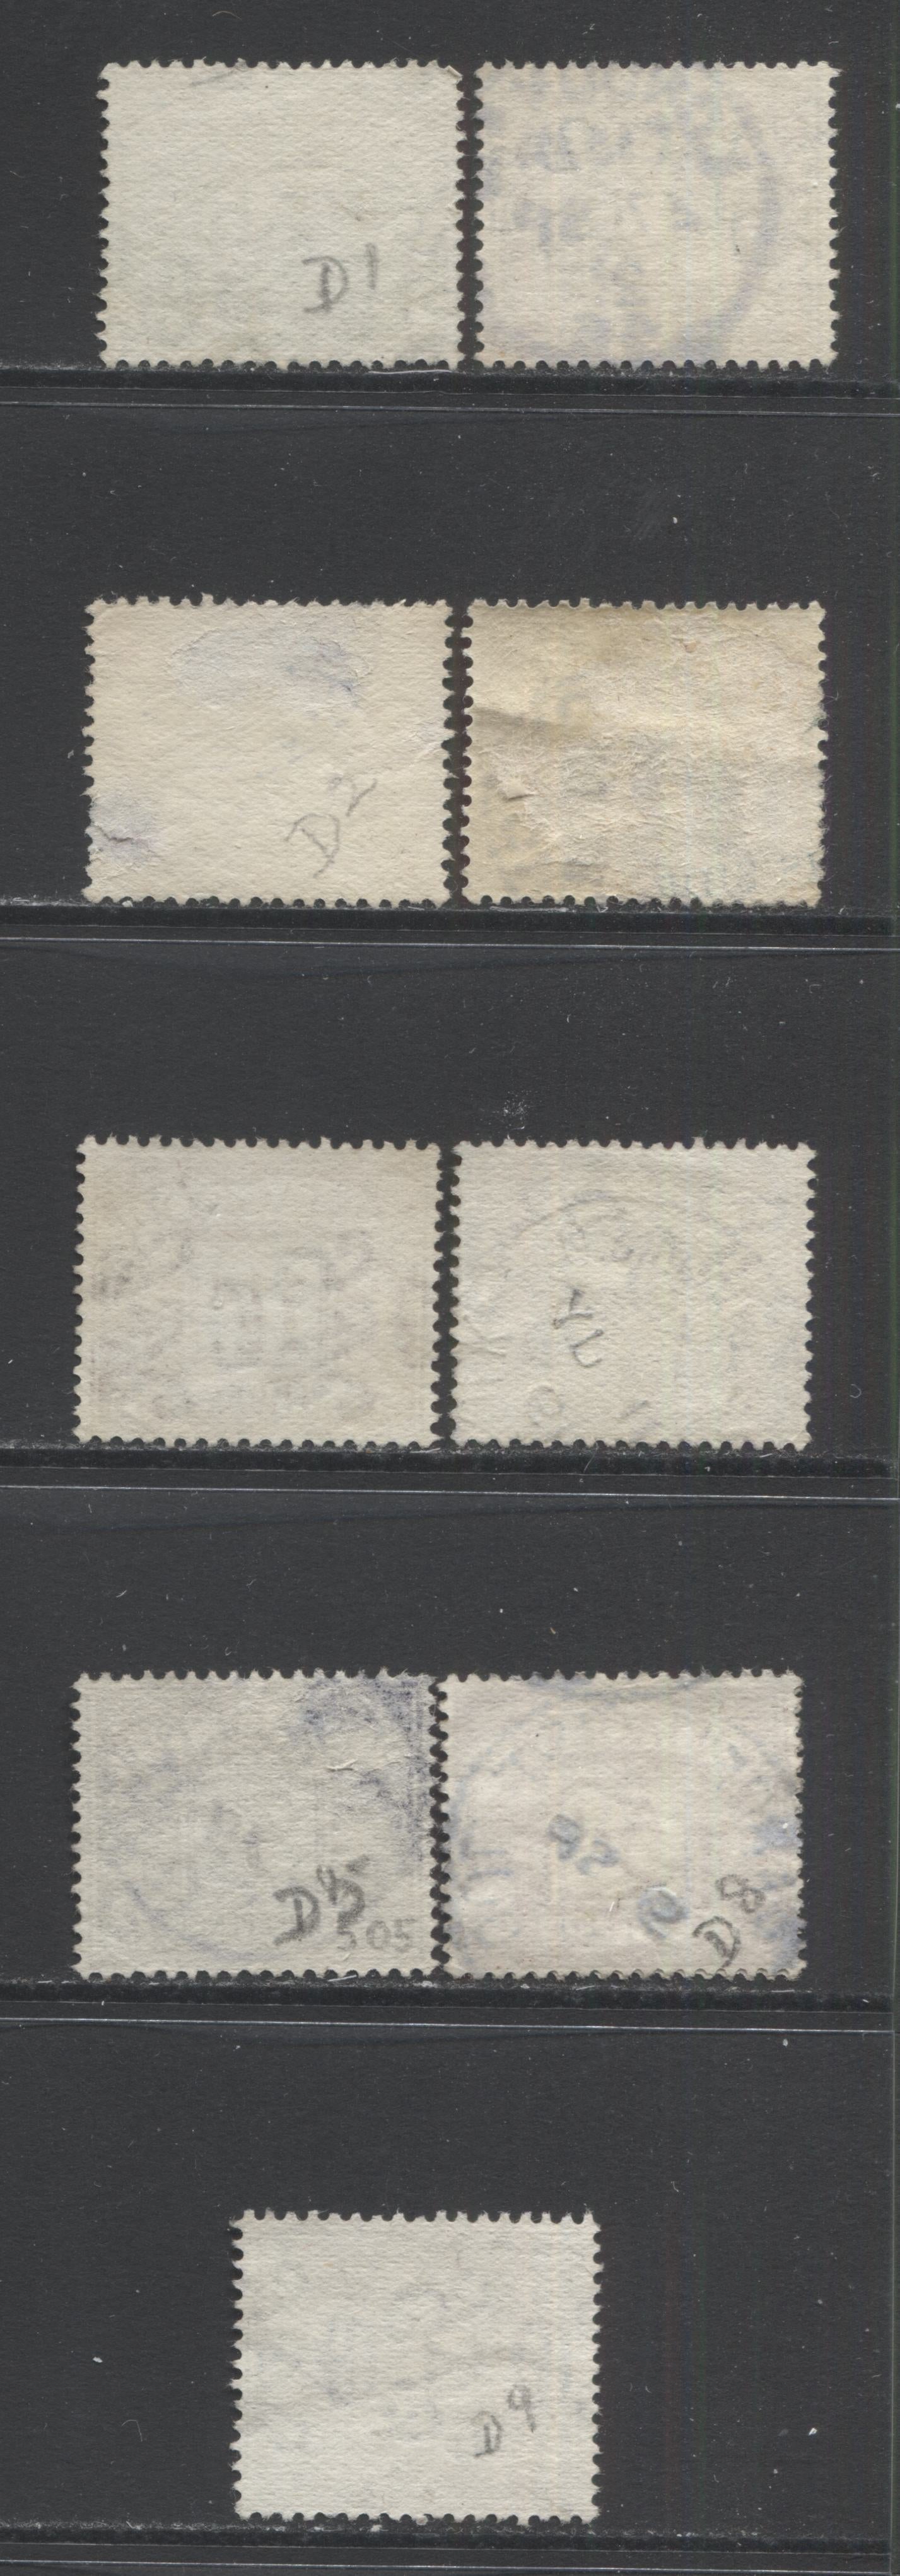 Lot 89 Great Britain SC#J1-J8 1914-1922 Postage Dues With Royal Cypher Watermark, A F/VF Used Range Of Singles, 2017 Scott Cat. $37.55 USD, Click on Listing to See ALL Pictures